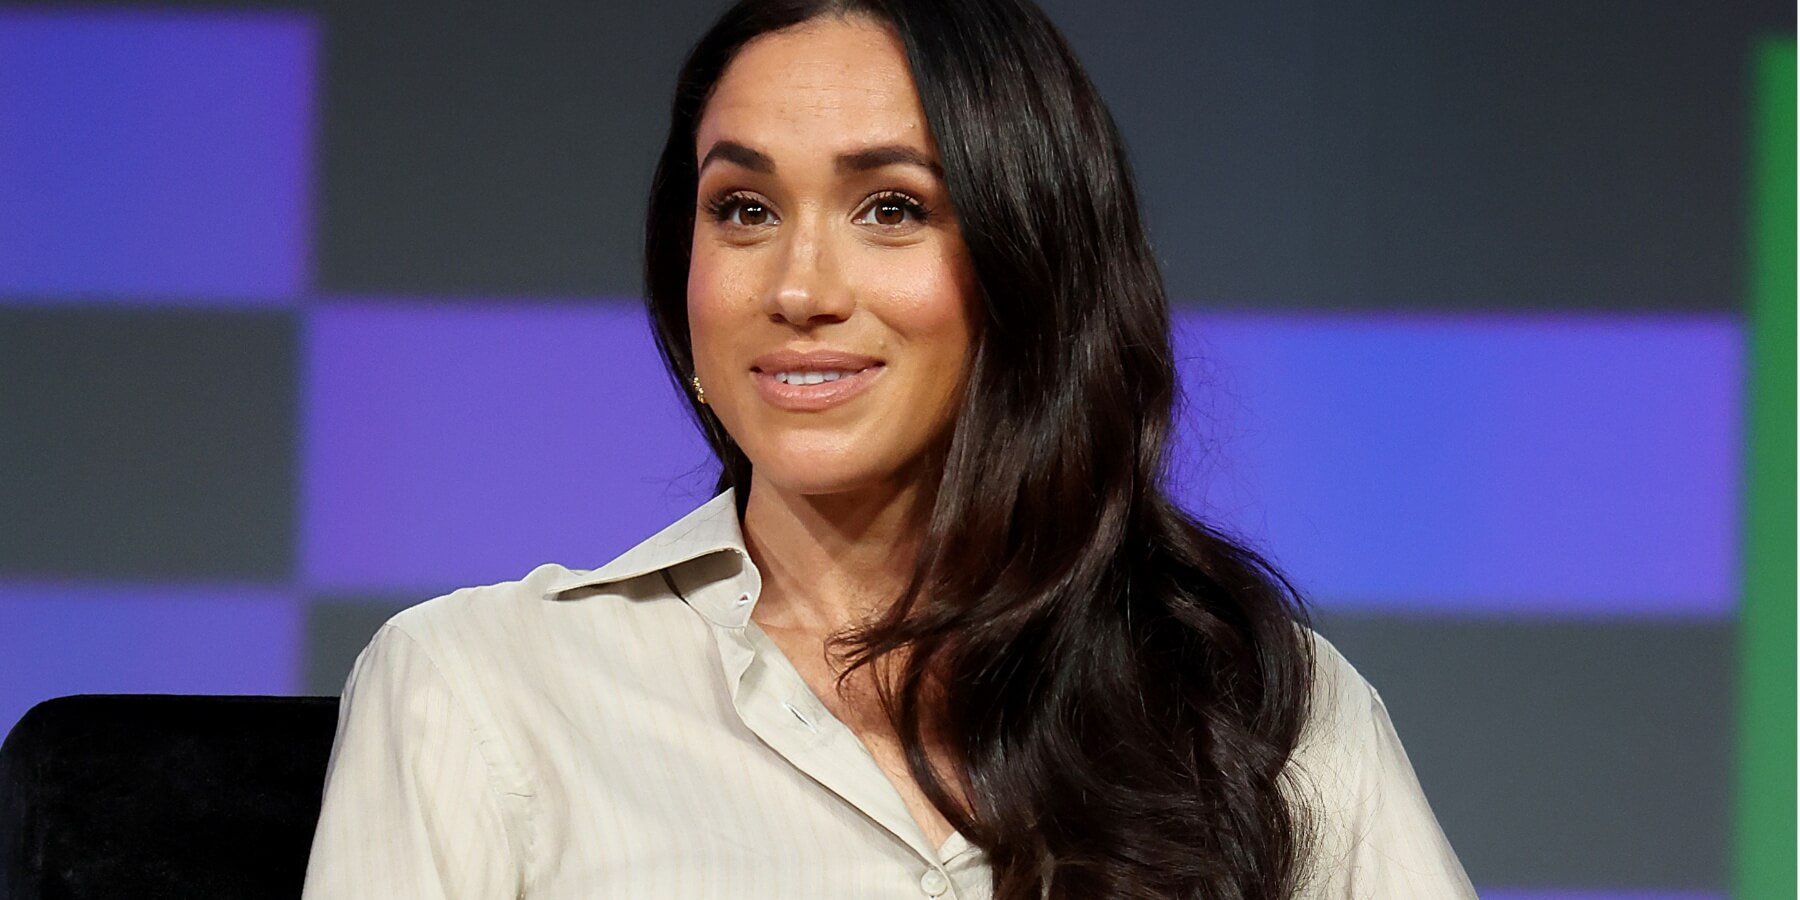 Meghan Markle a Victim of ‘Disturbing, Hateful Bullying’ While in Royal Family: Commentator